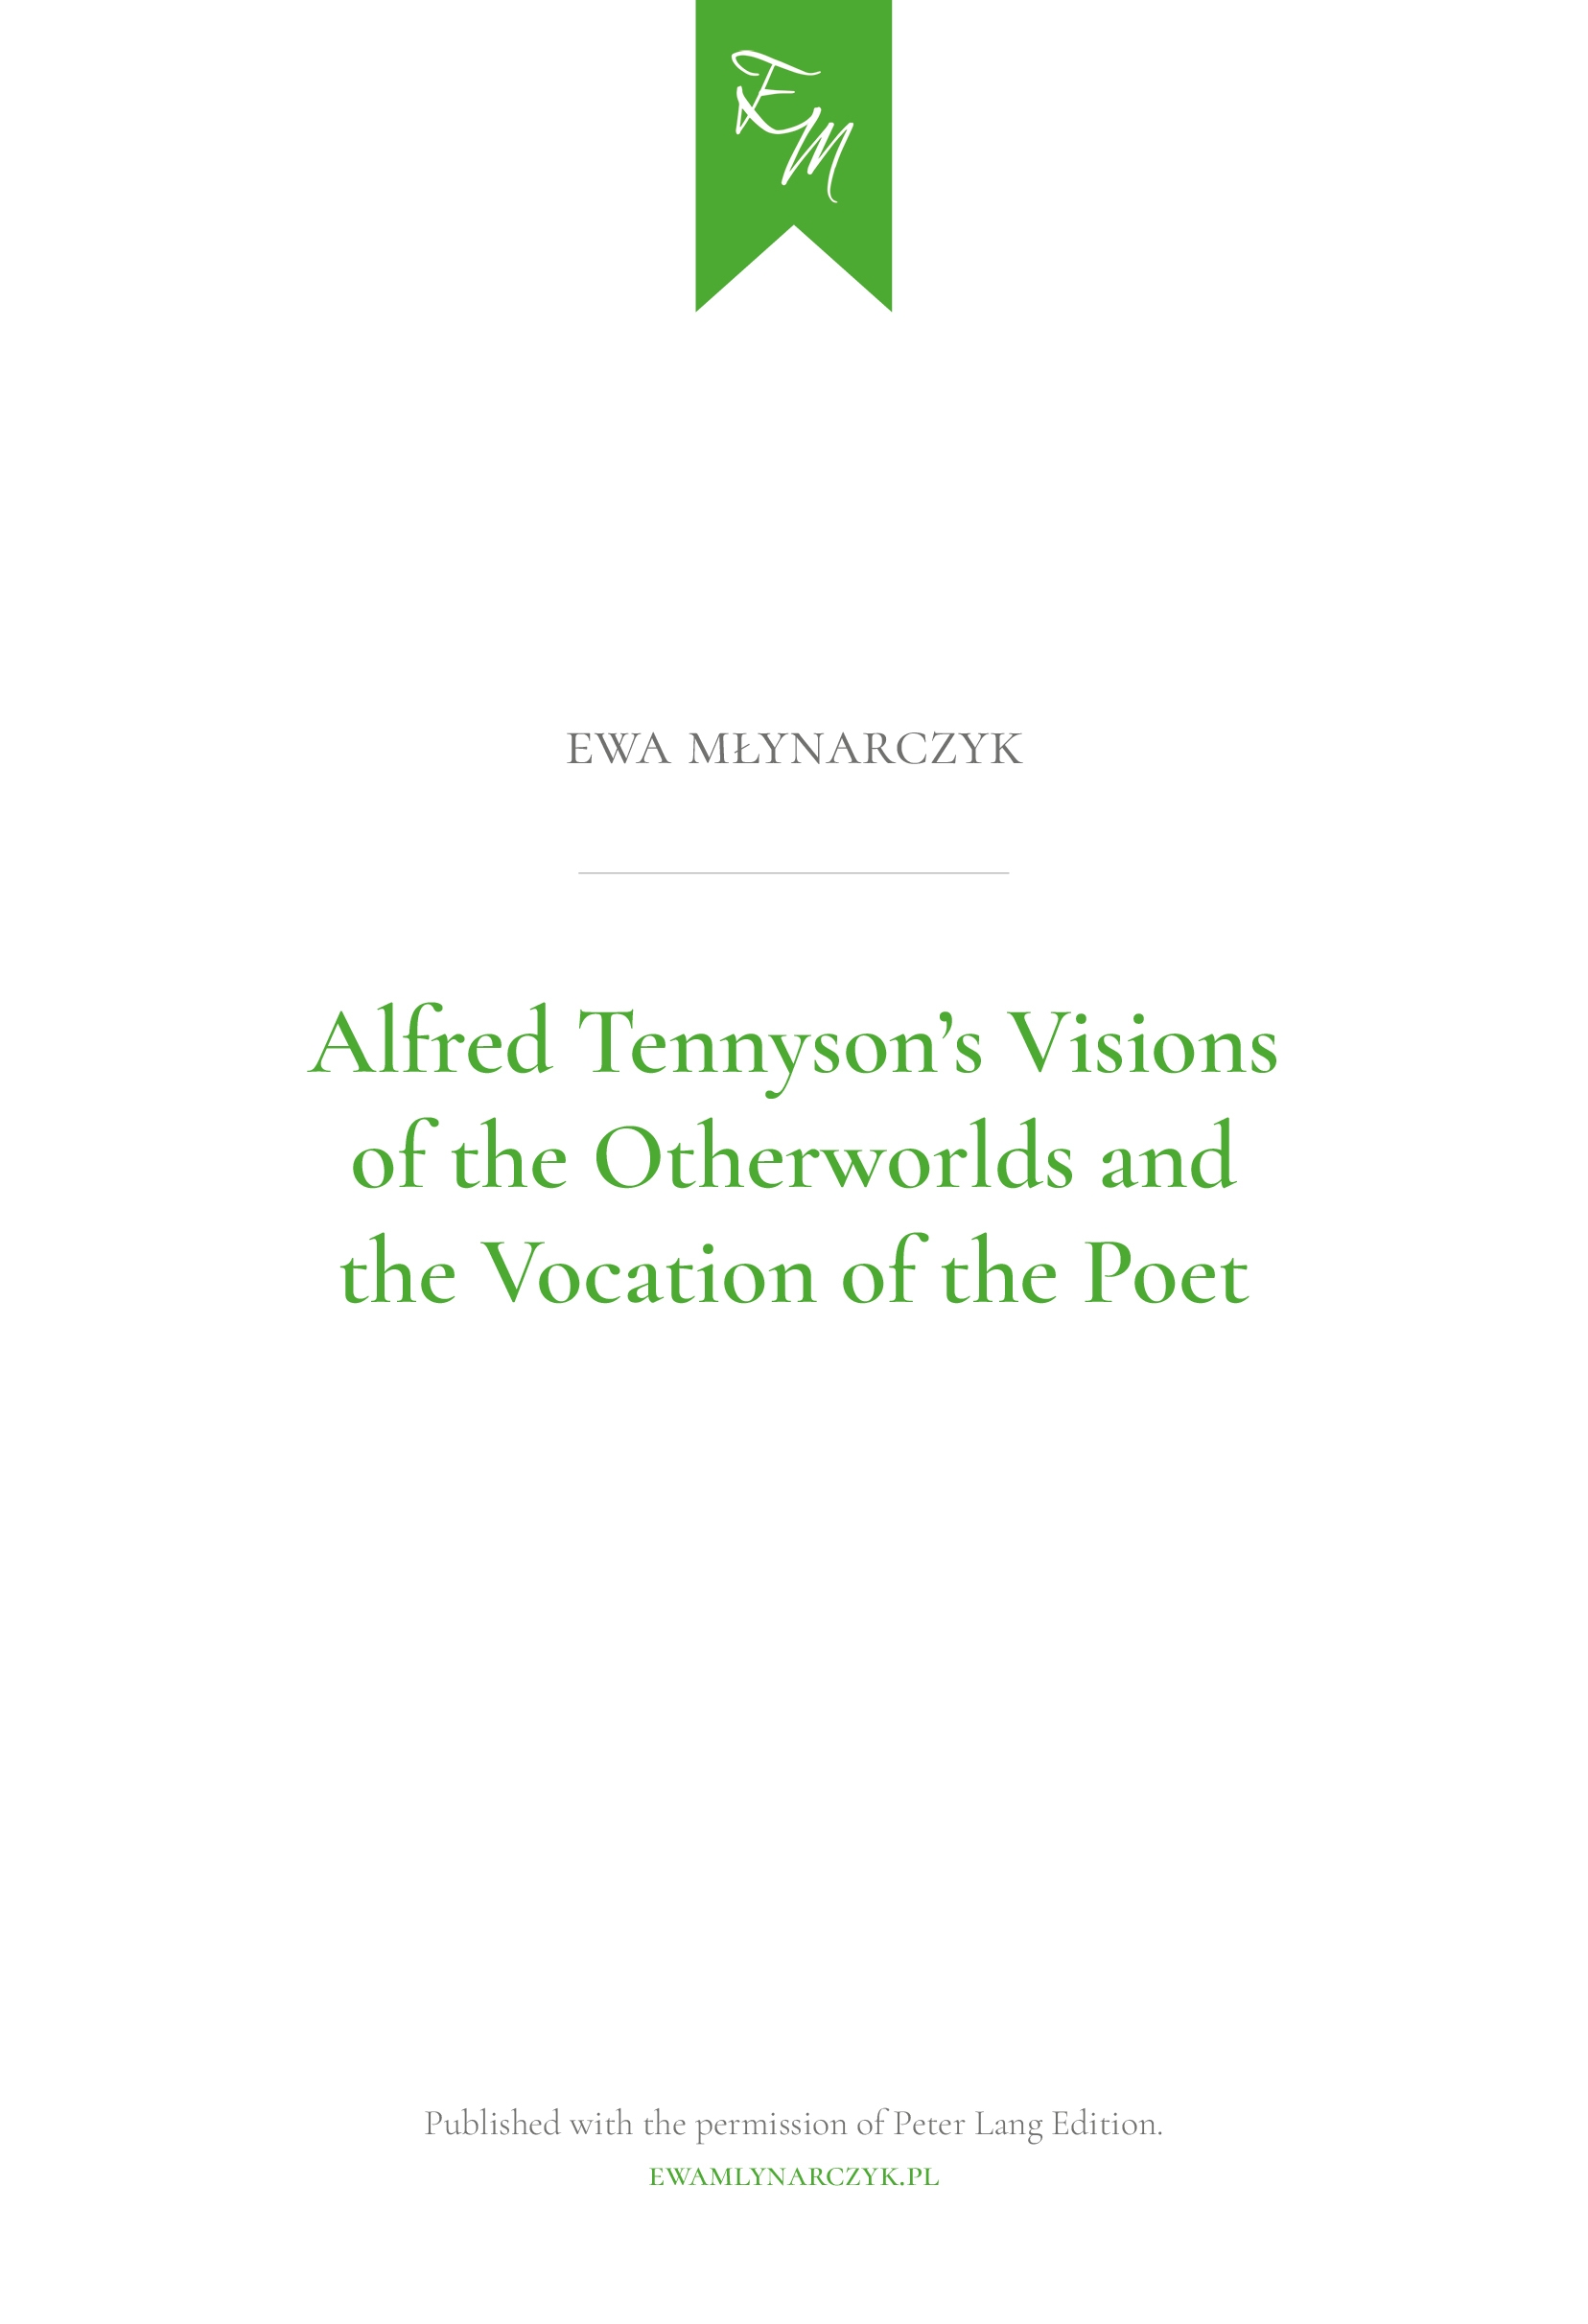 Articles by Ewa Młynarczyk / Artykuły Ewy Młynarczyk: Alfred Tennyson's Visions of the Otherworlds and the Vocation of the Poet